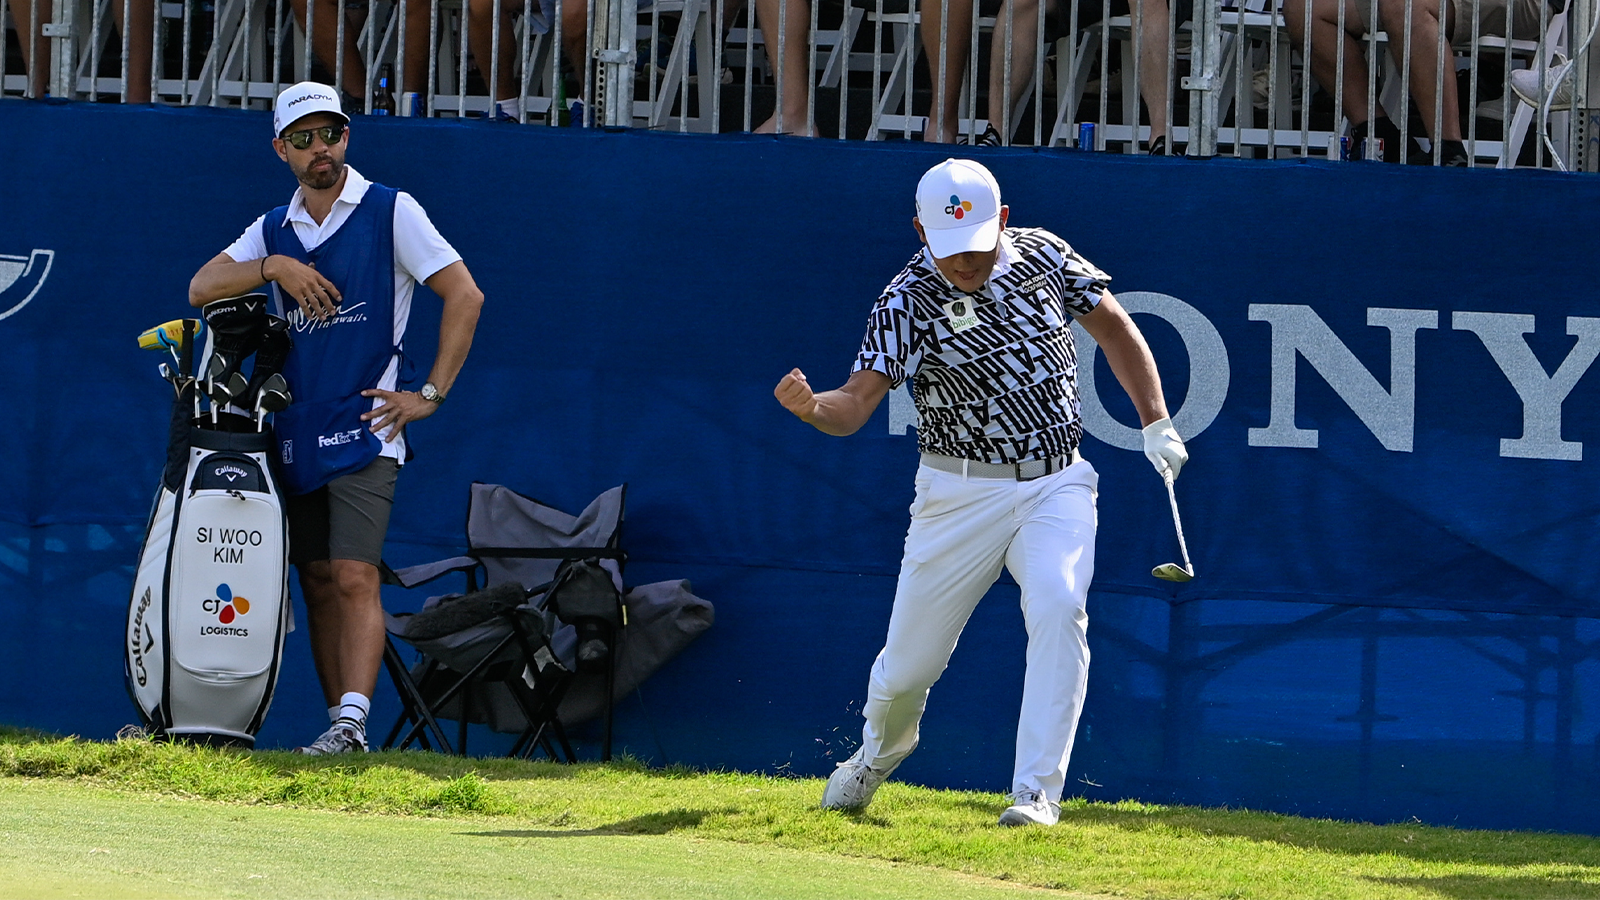 Si Woo Kim reacts to chipping in for birdie from the off the green on the par three 17 during Rd 4 of the Sony Open at Waialae Country Club on January 15, 2023 in Honolulu, Hawaii. (Photo by Ken Murray/Icon Sportswire via Getty Images)